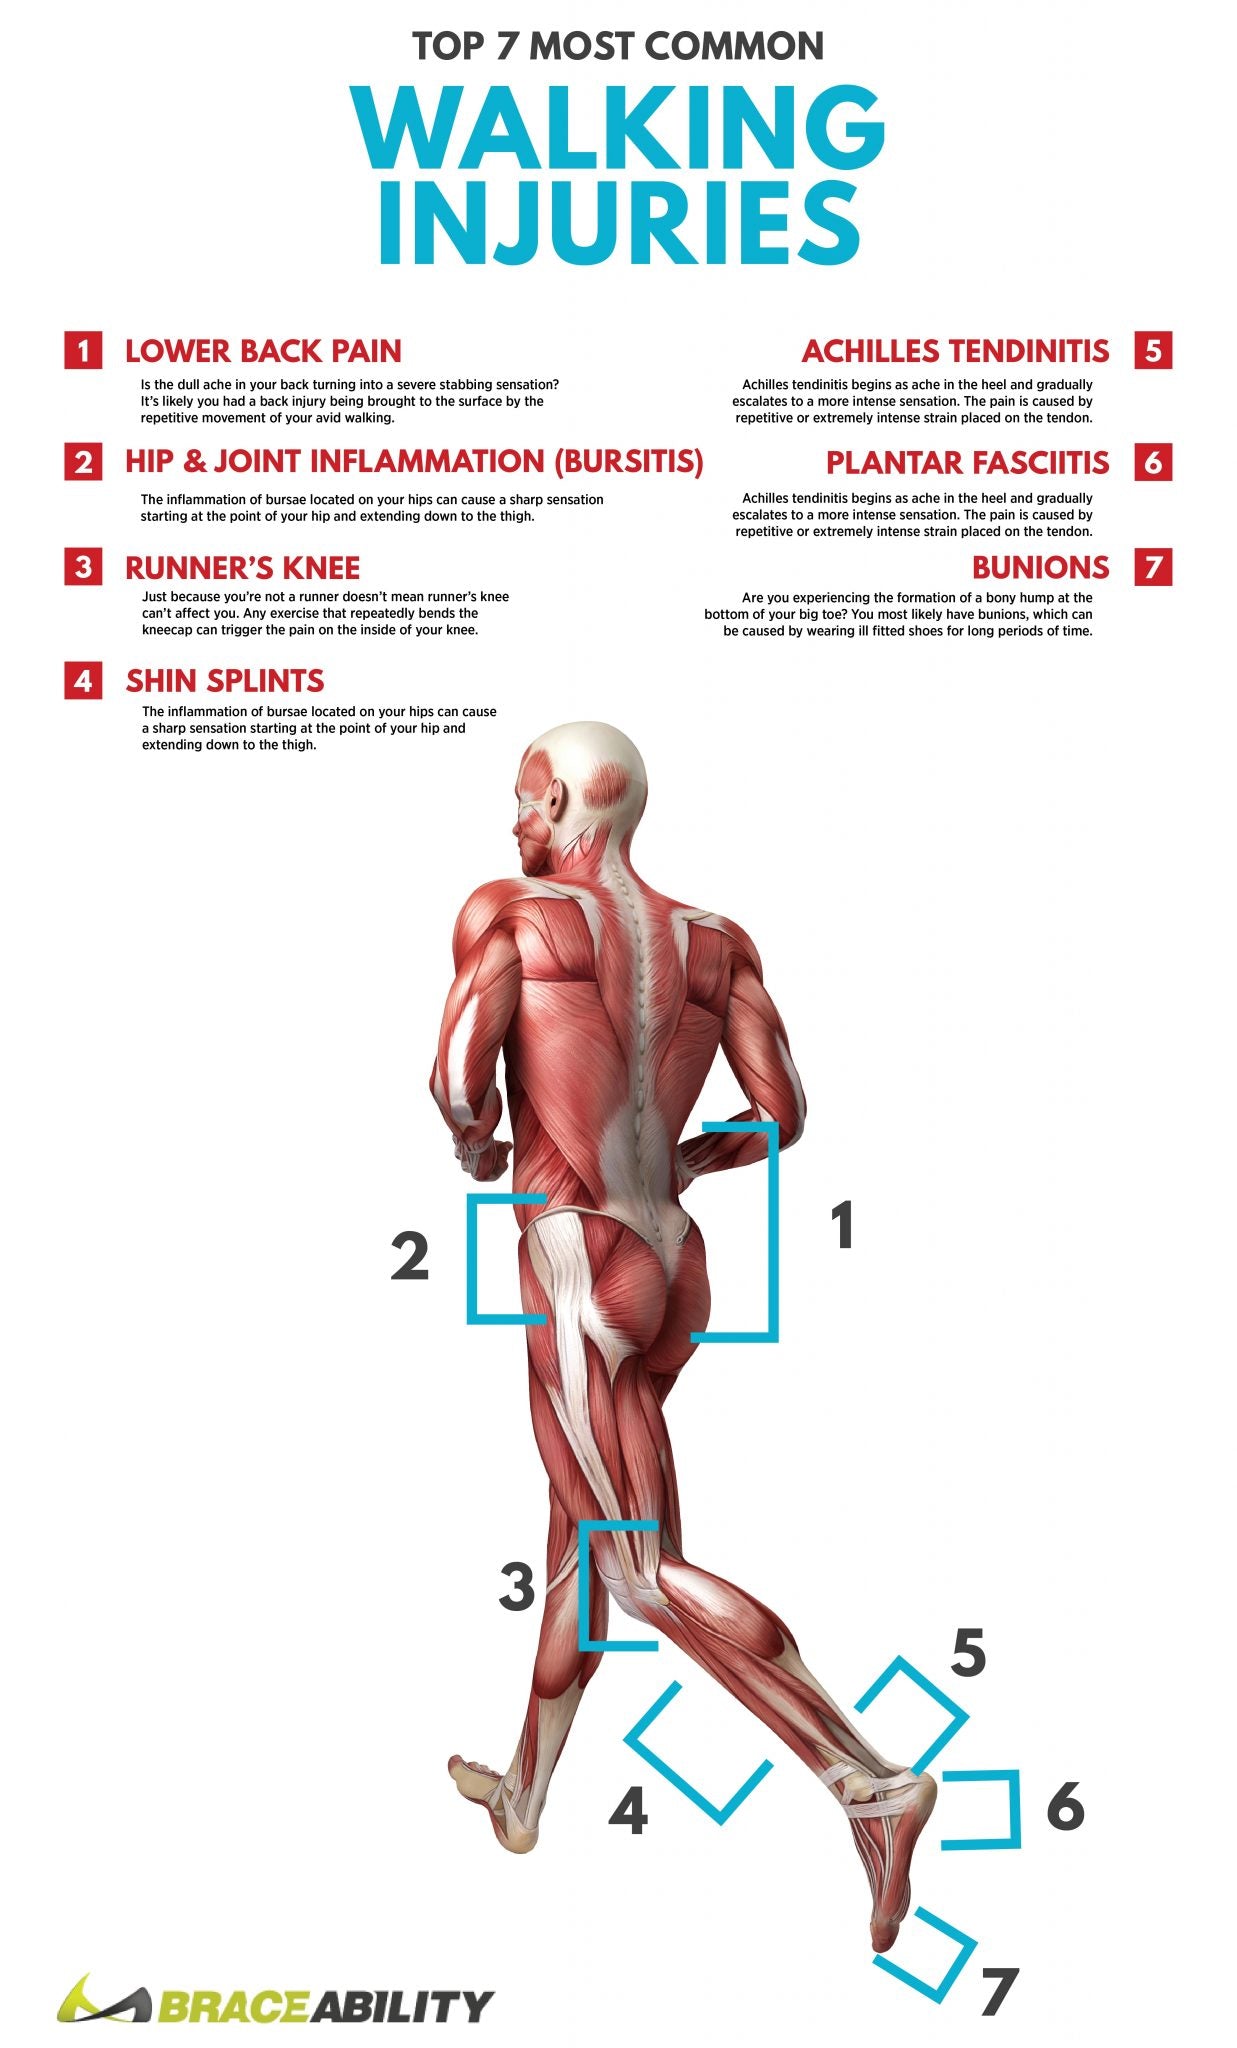 infographic of the most common injuries you can get while walking that can hurt your back or legs